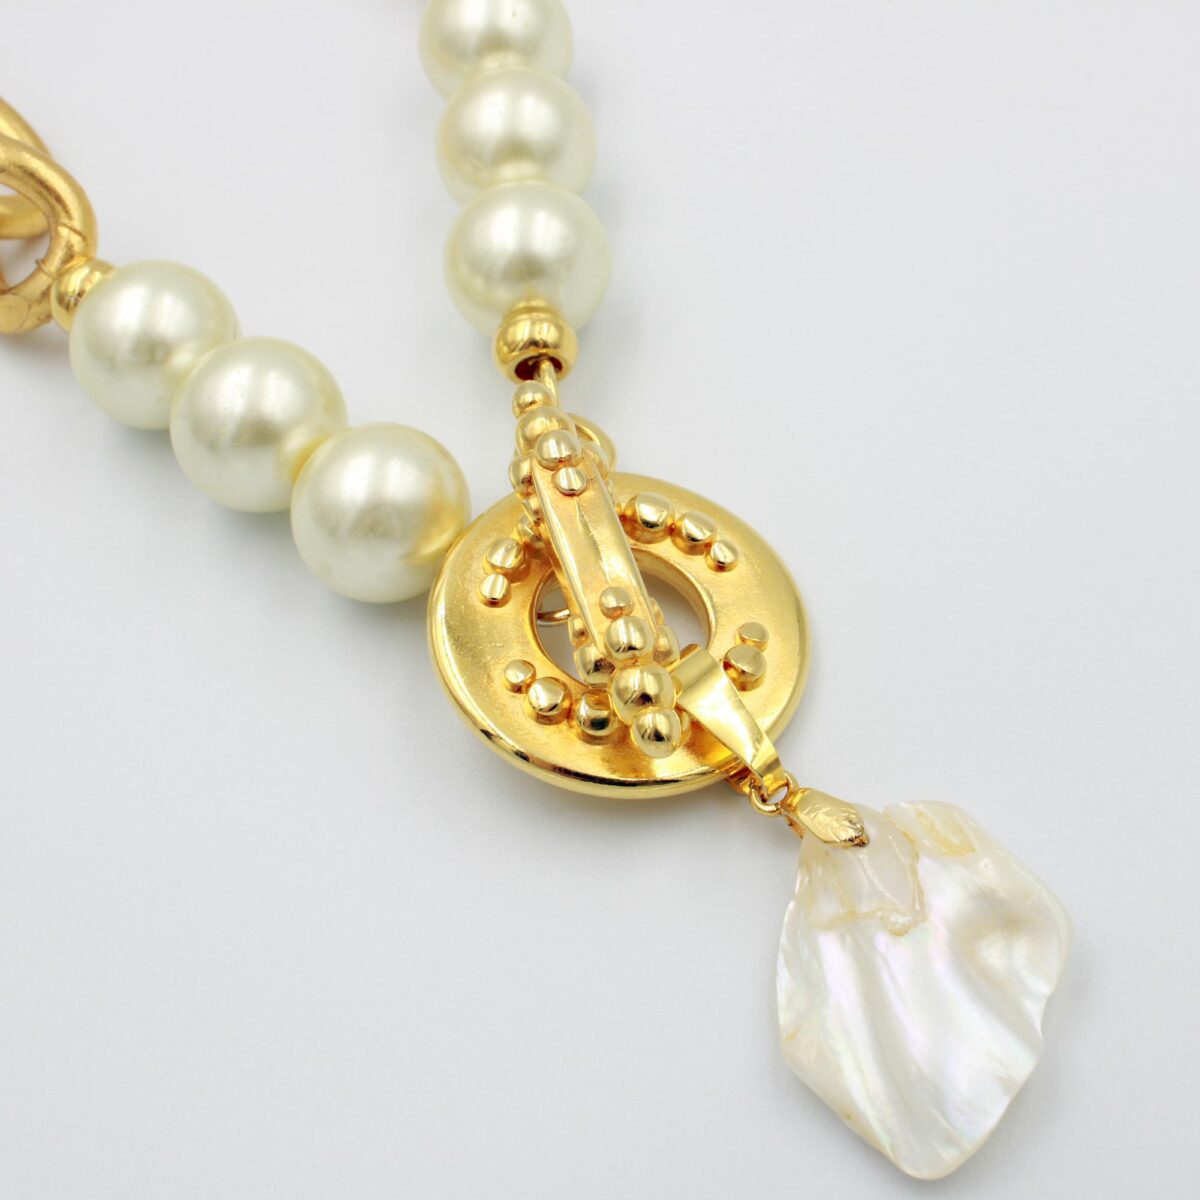 Women's Necklace with Gold Plated 24k Steel Chain, White Pearls and Natural Pearl